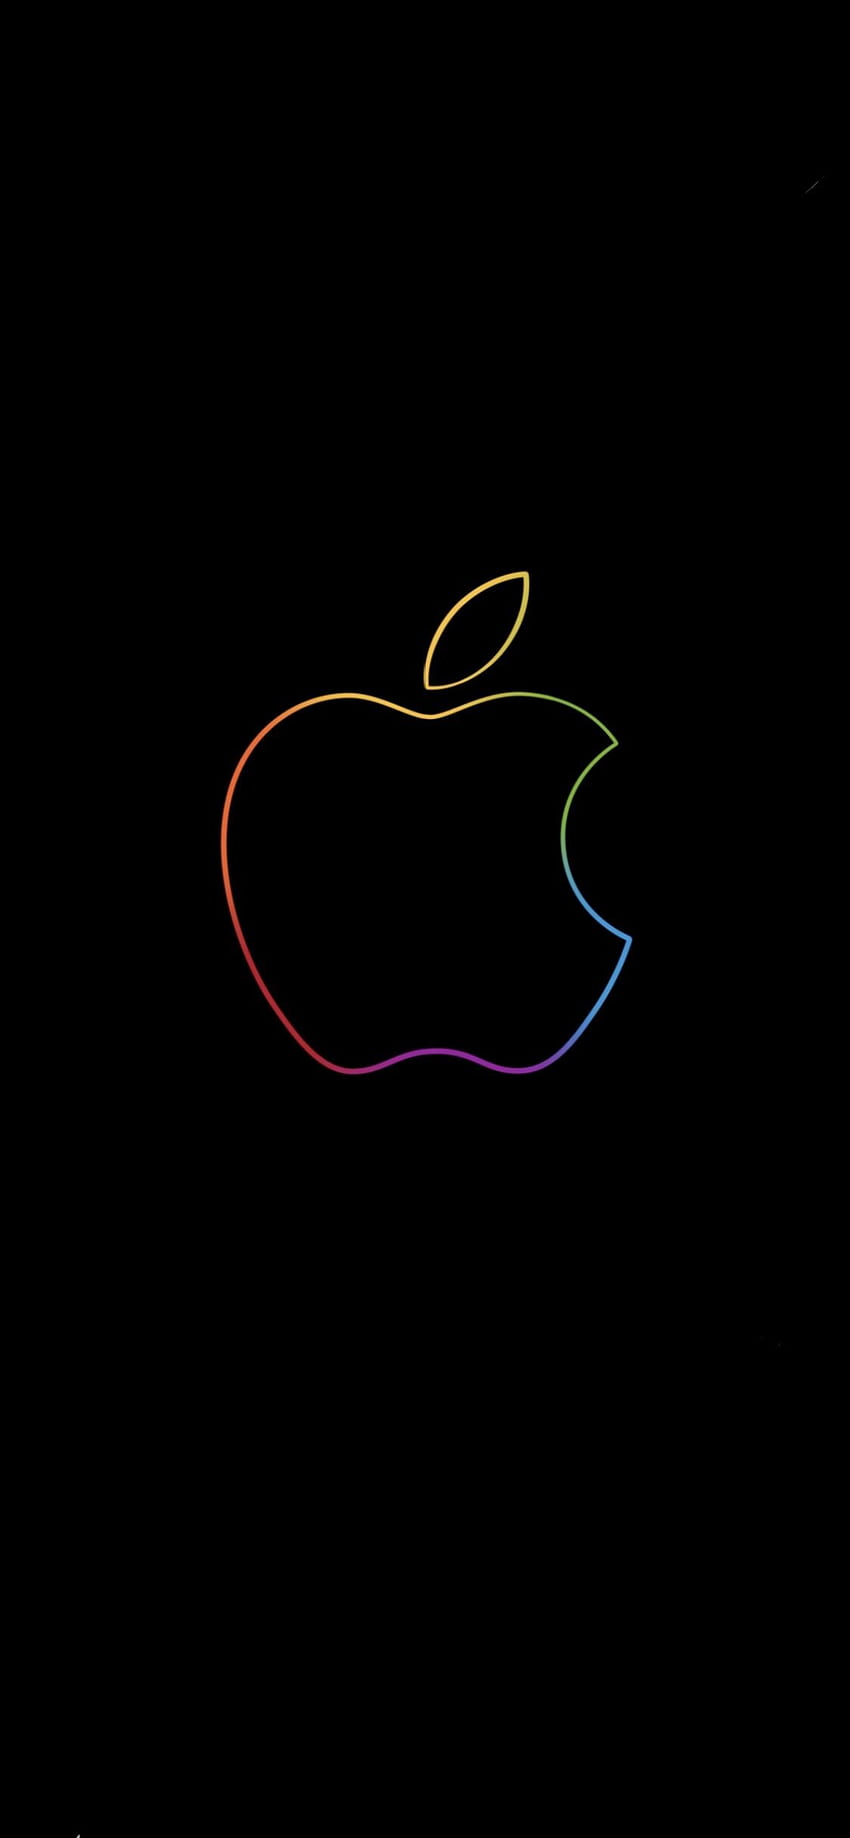 Made a from the “We will be right back” screen for the Apple store ...